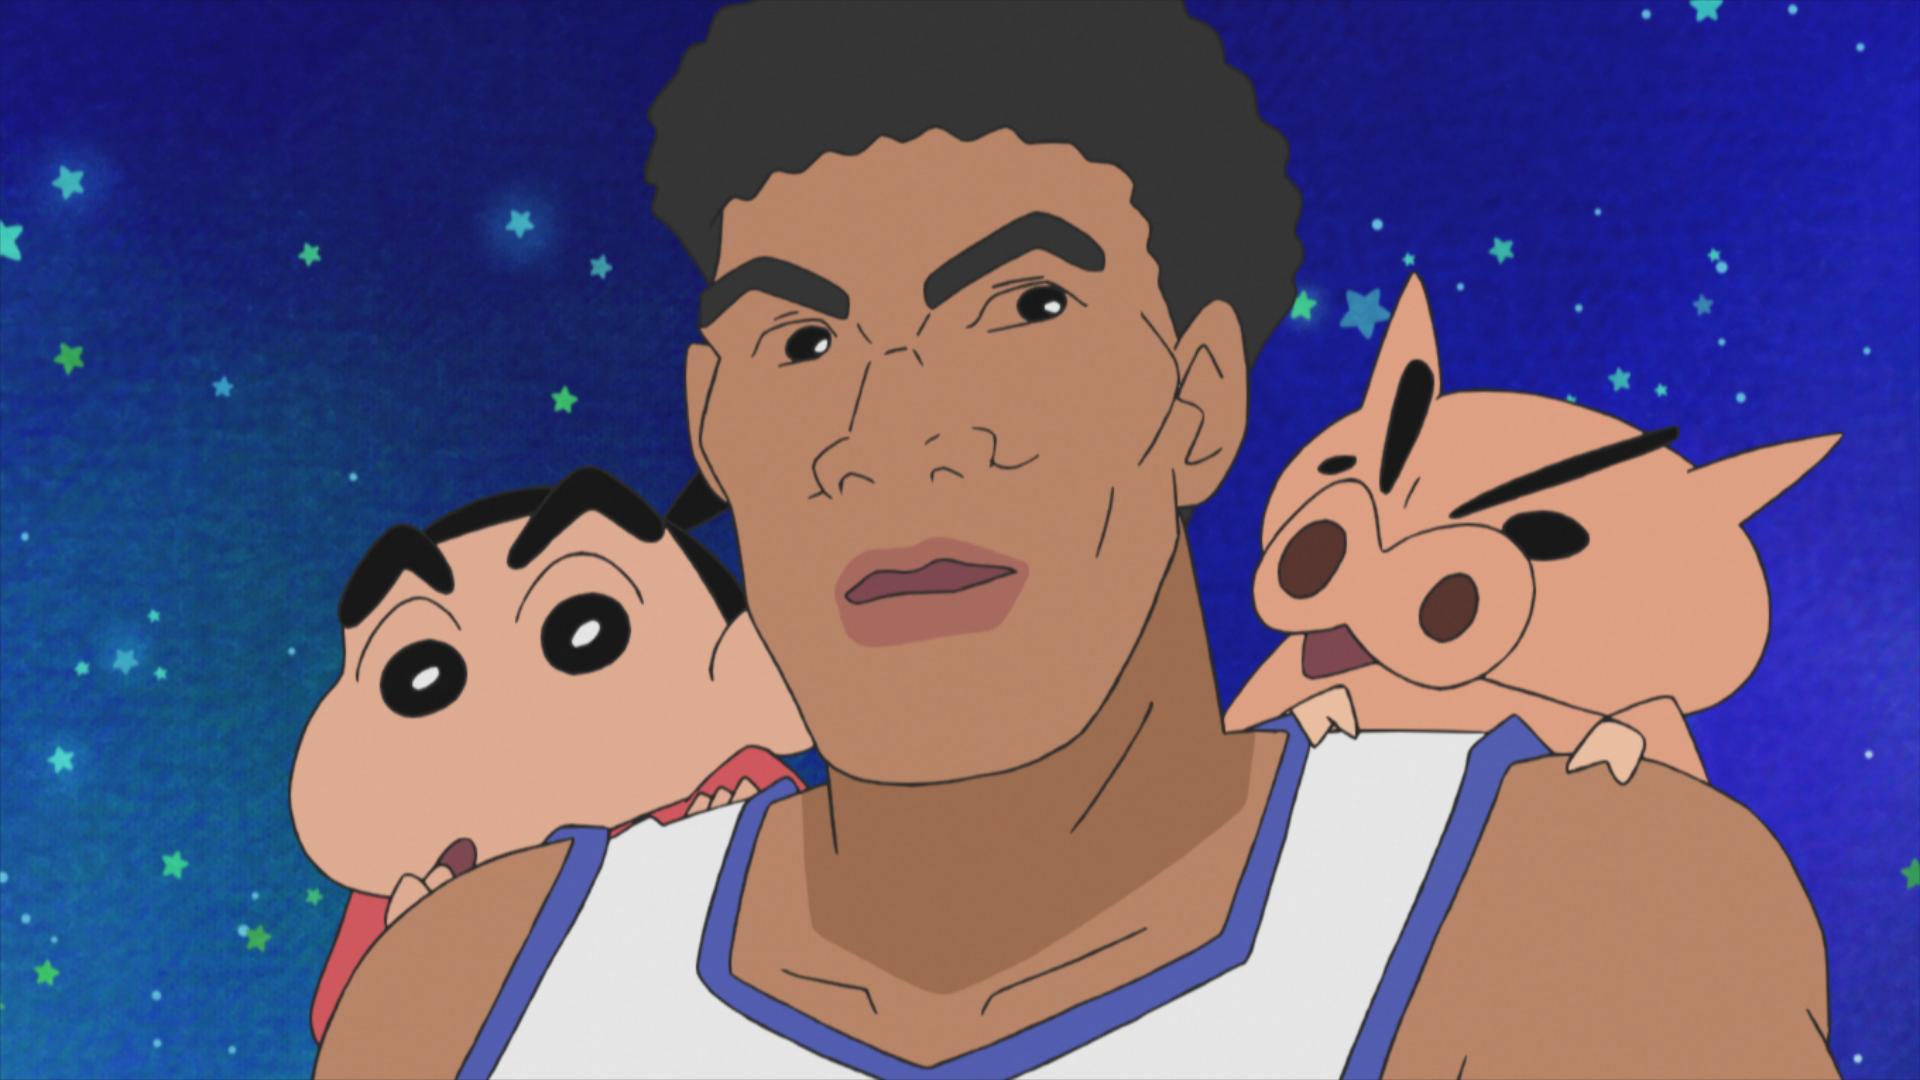 The Lakers' Rui Hachimura will guest star in an upcoming episode of the anime series